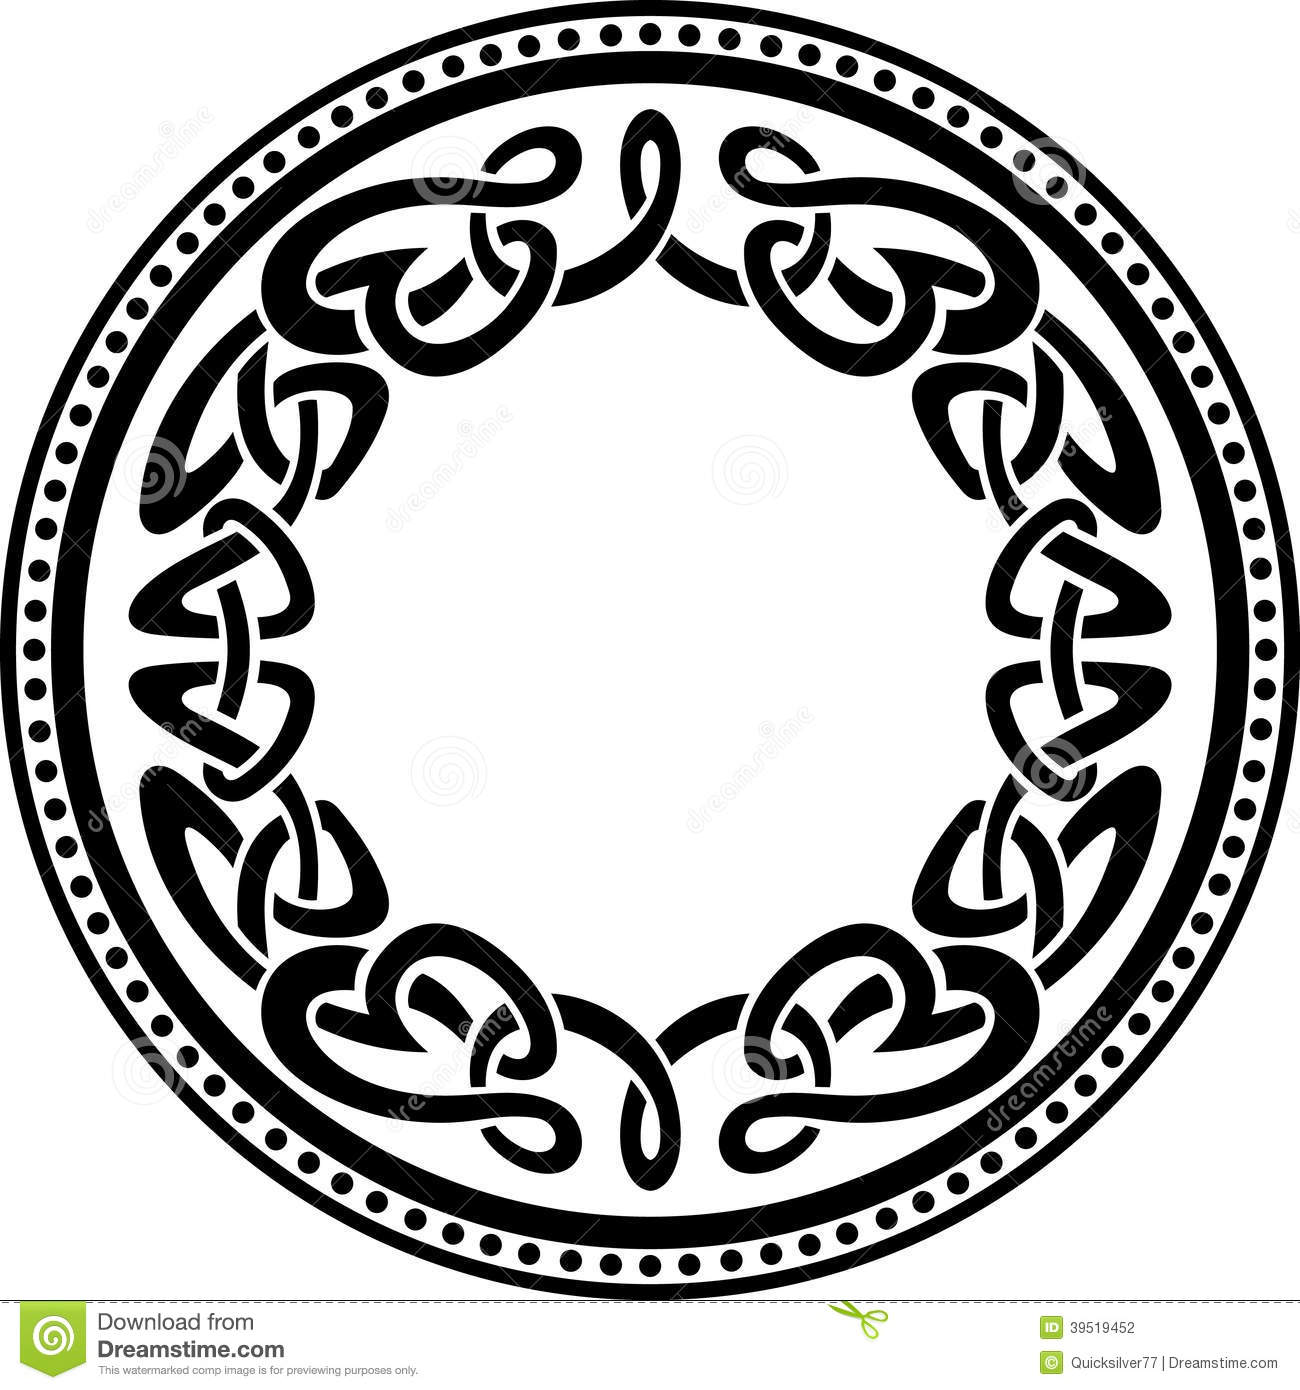 Image Gallery For Celtic Knot Wallpaper Border Patterns